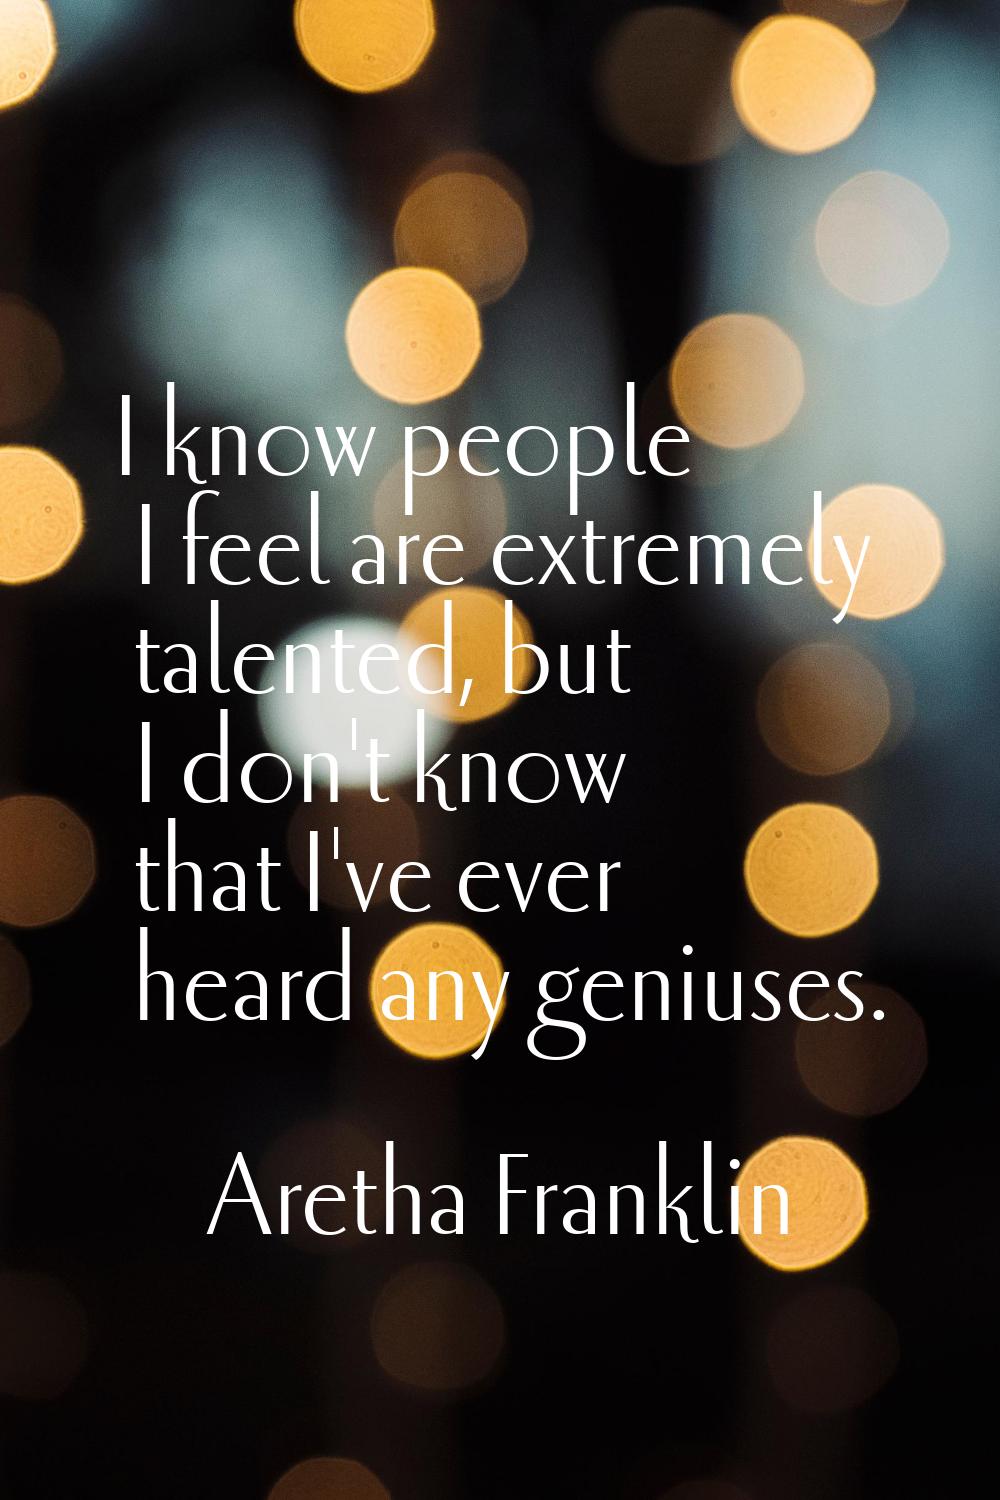 I know people I feel are extremely talented, but I don't know that I've ever heard any geniuses.